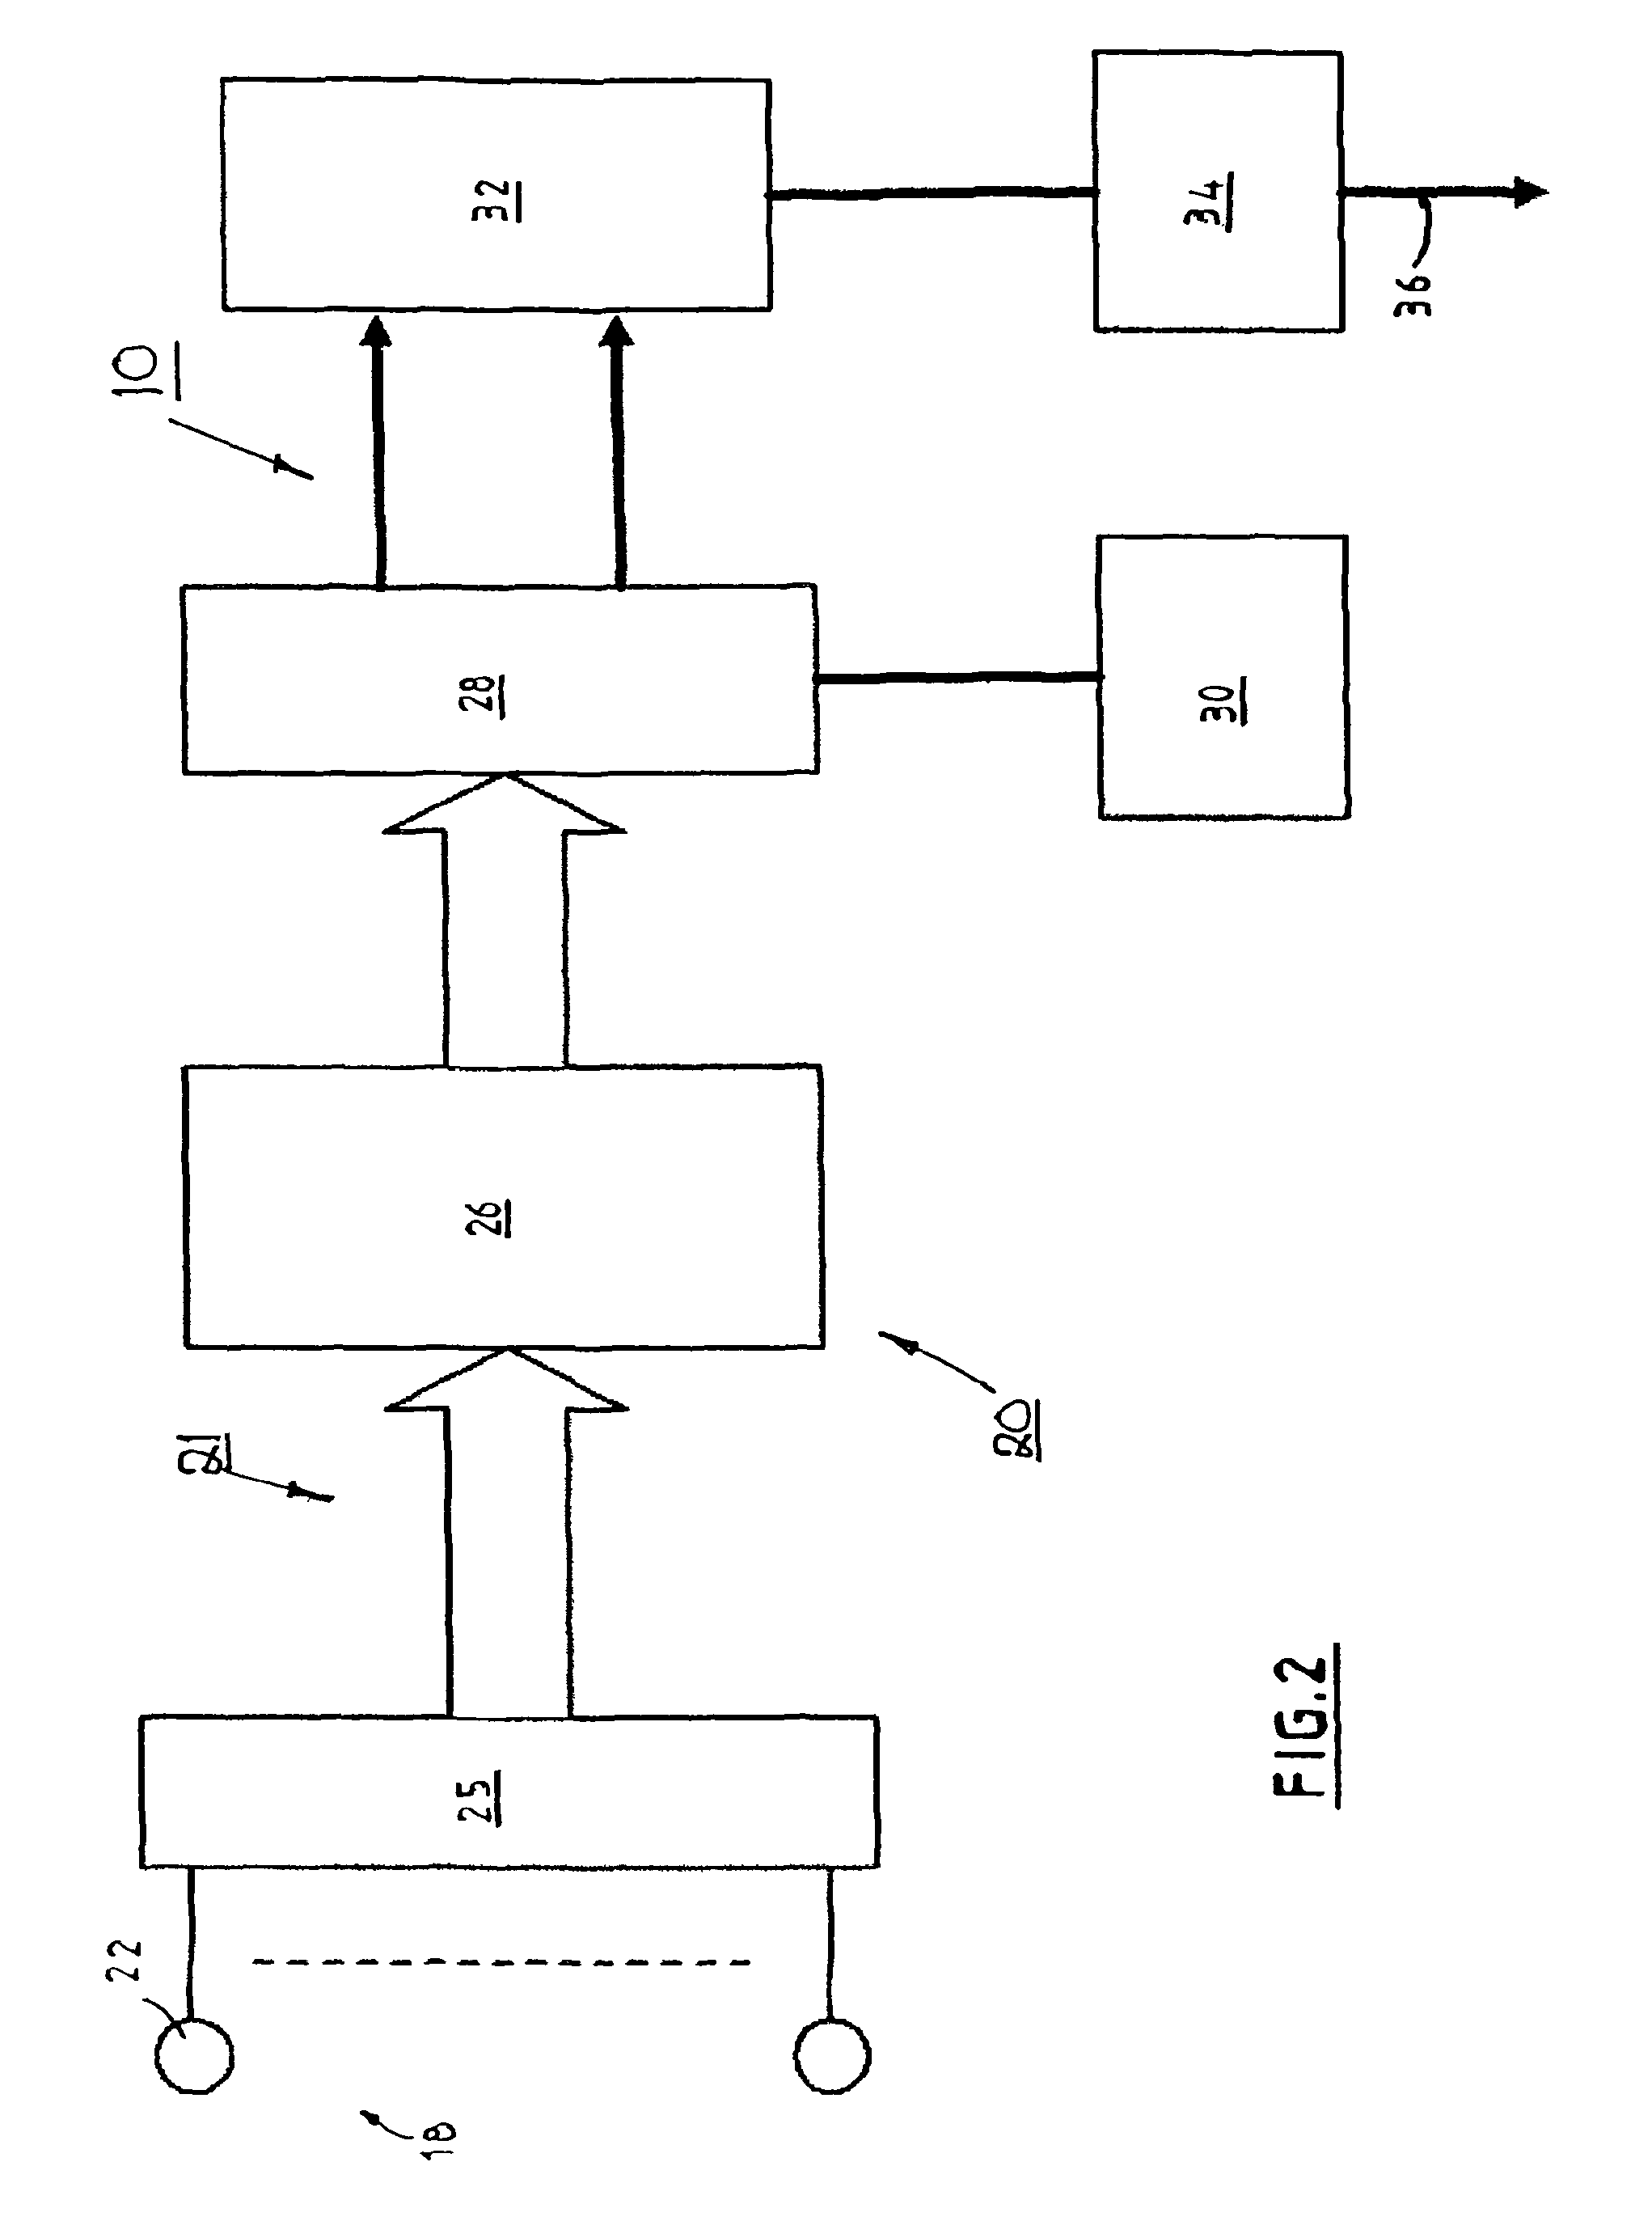 Microphone array system and method for sound acquisition